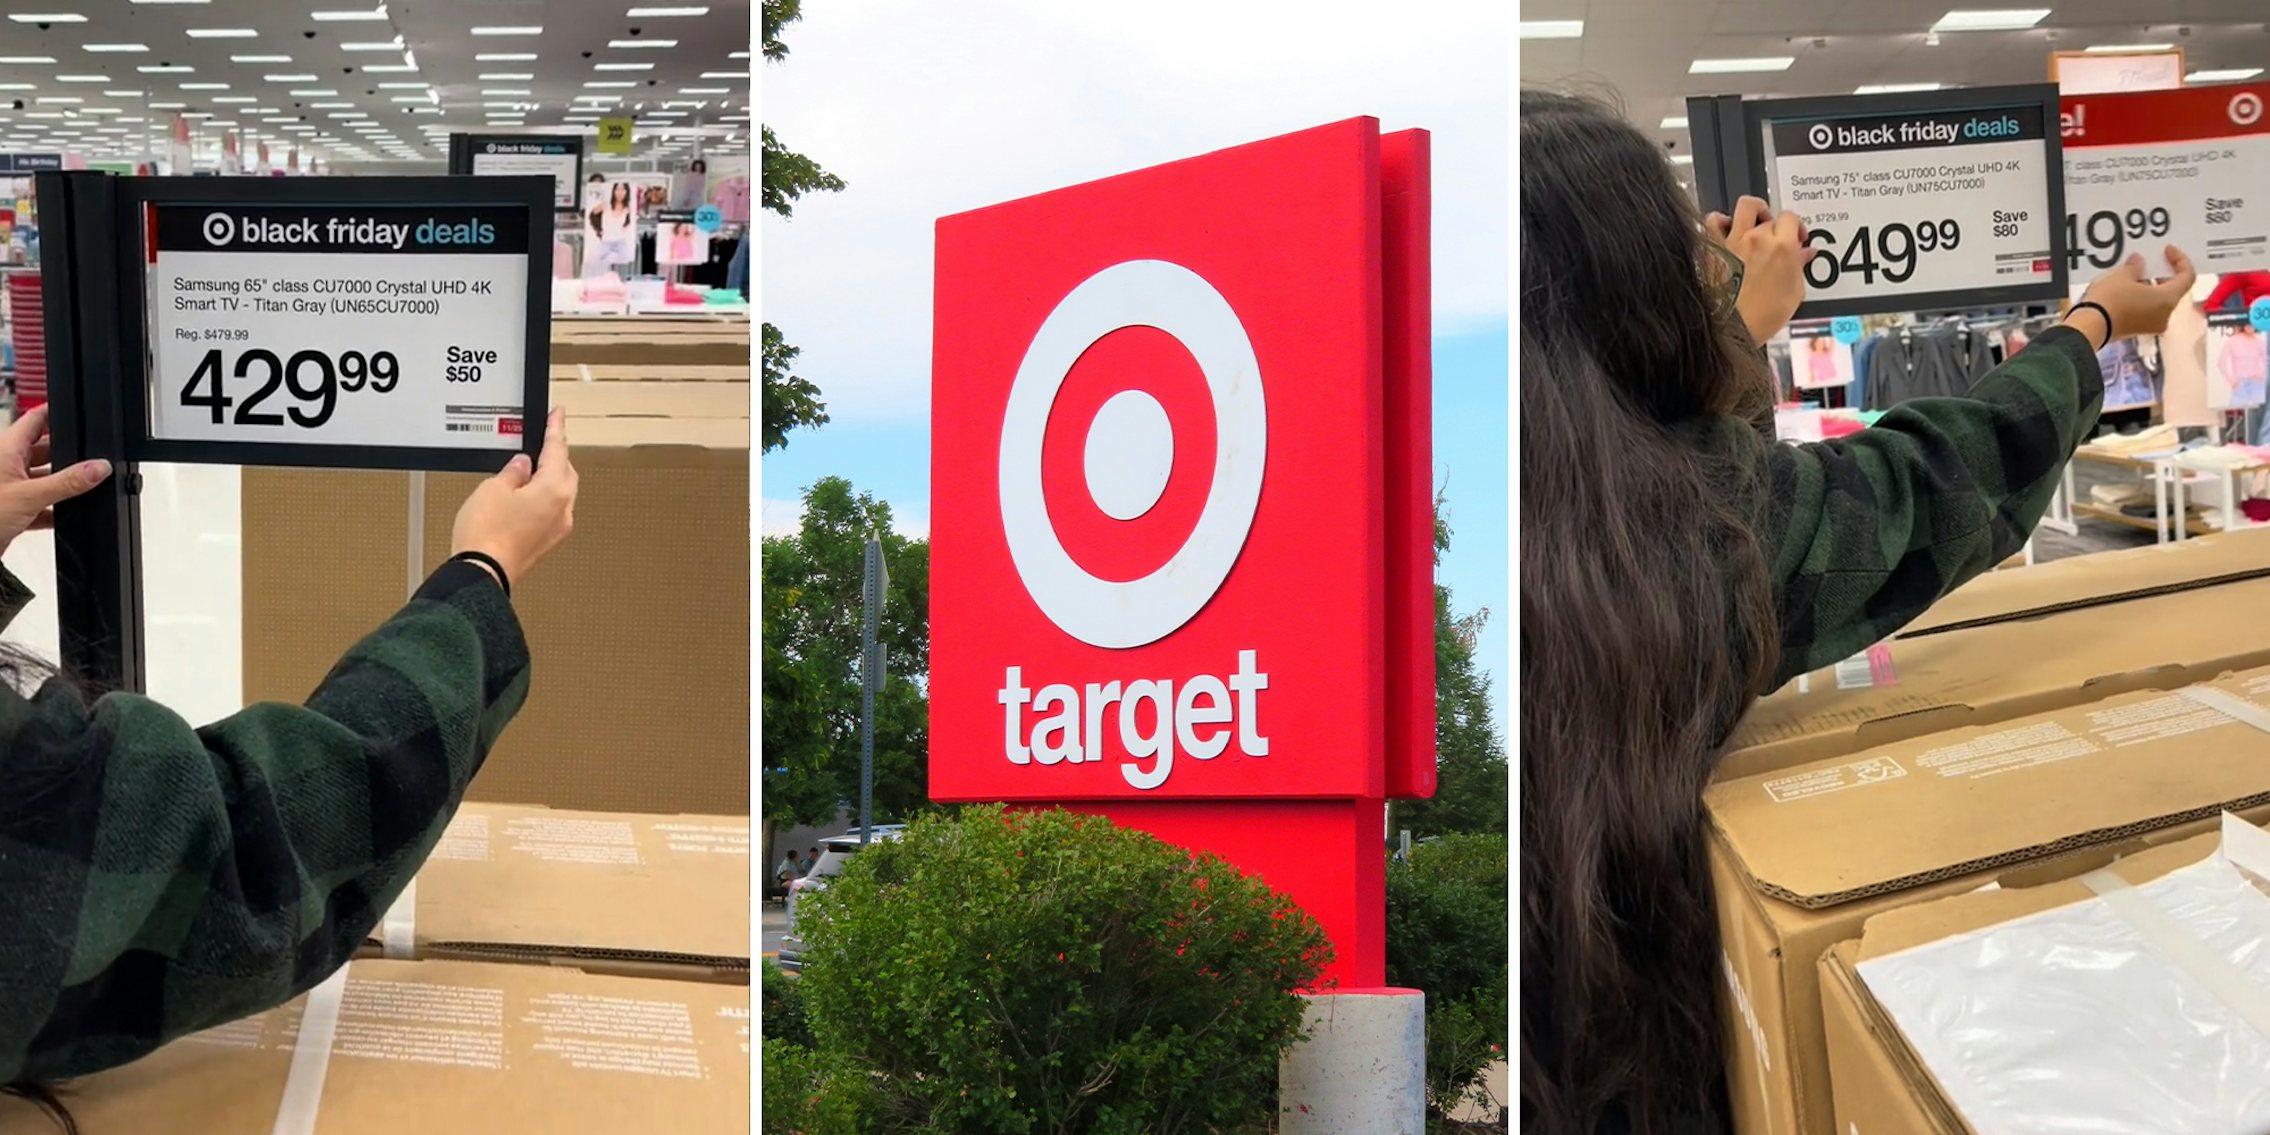 Target Deals This Week  Find the BEST Deals to Save Money at Target!